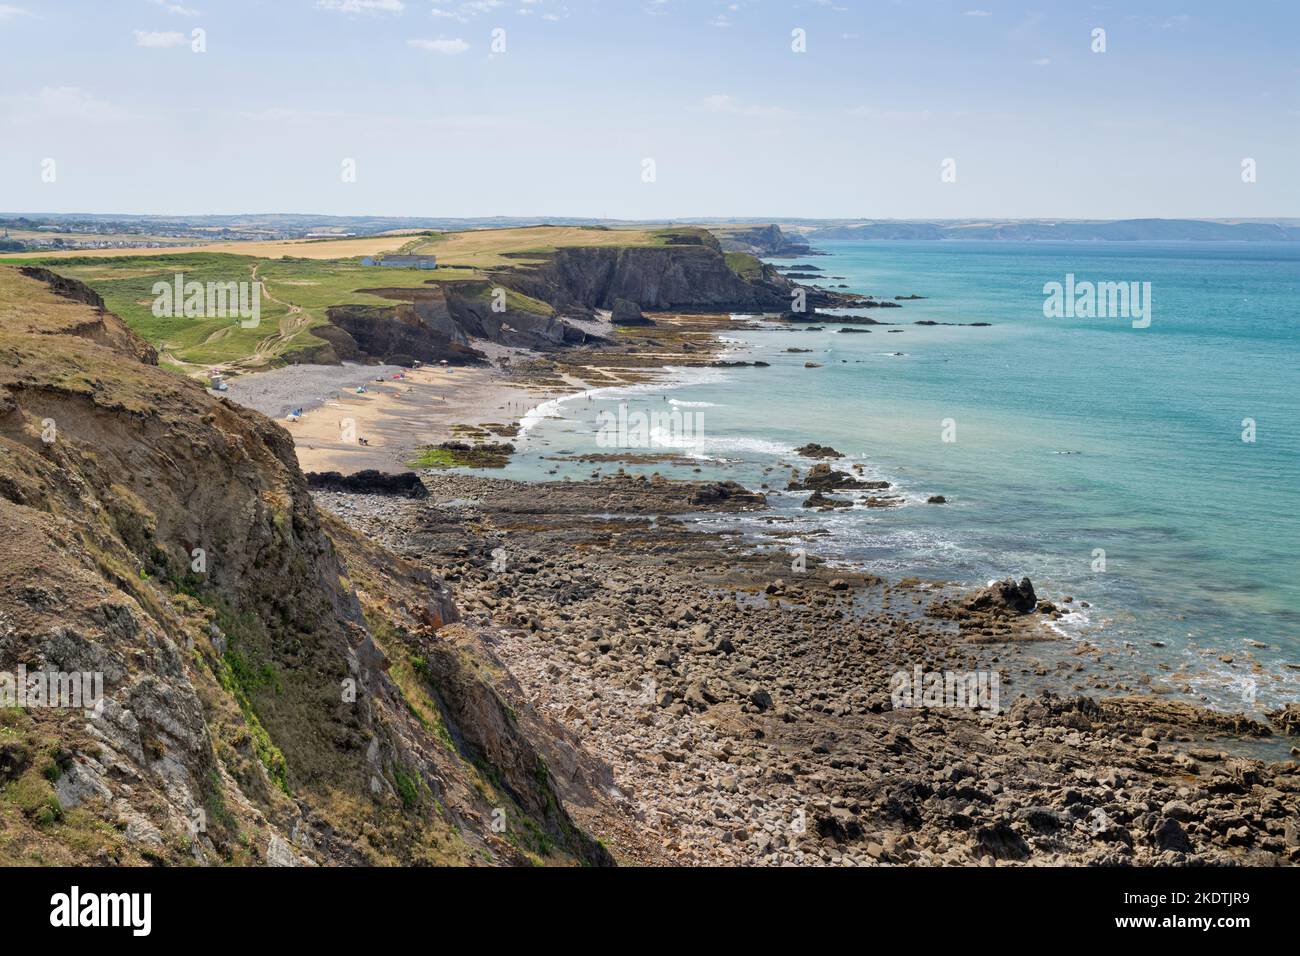 View from the SW coast path at Menachurch Point of Northcott Mouth beach and heavily eroded cliffs looking south towards Bude, north Cornwall, UK July Stock Photo